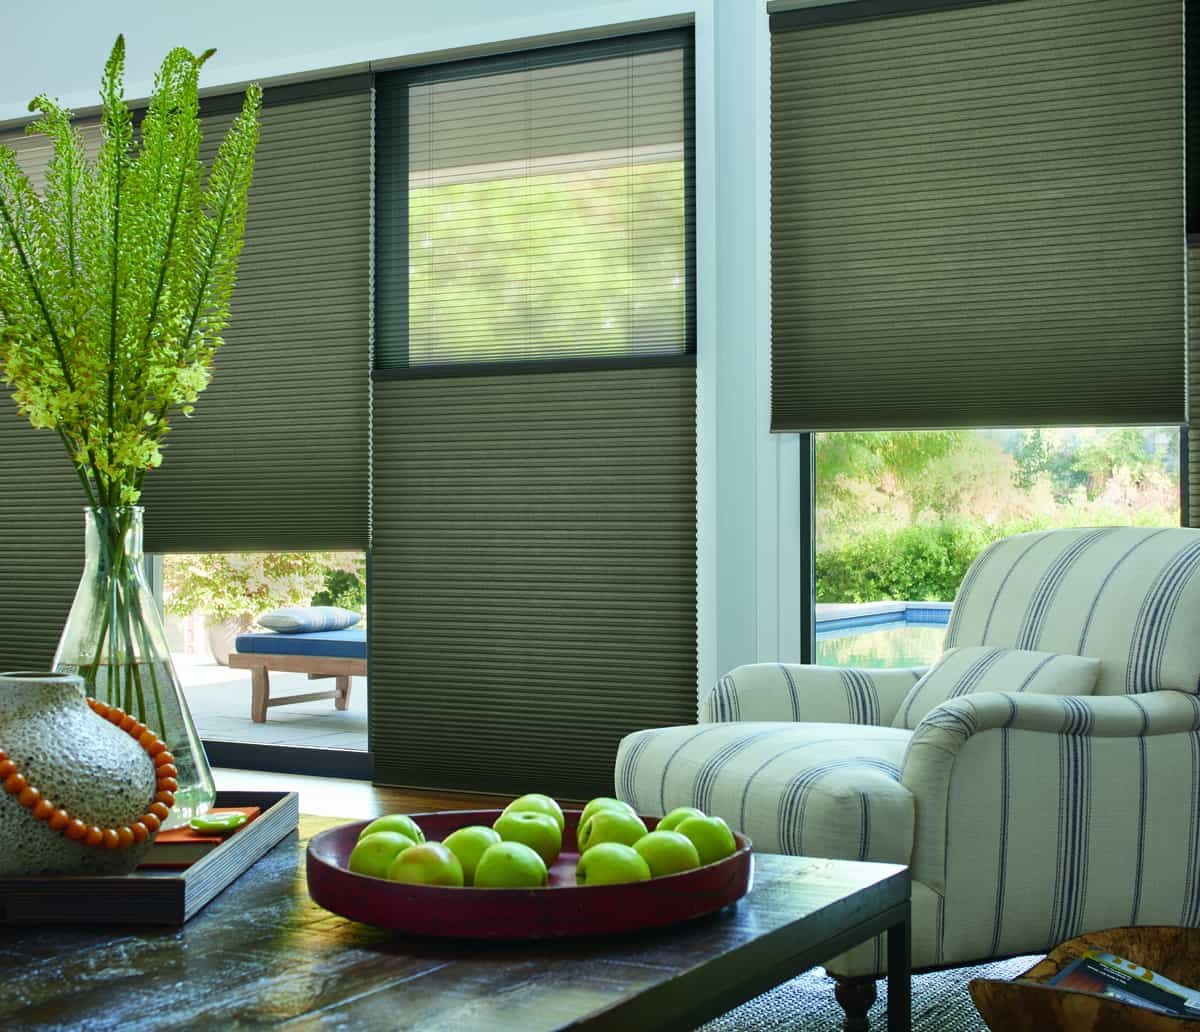 Duette® Honeycomb Shades near Denver, Colorado (CO), and Hunter Douglas shades that pair with north-facing windows.